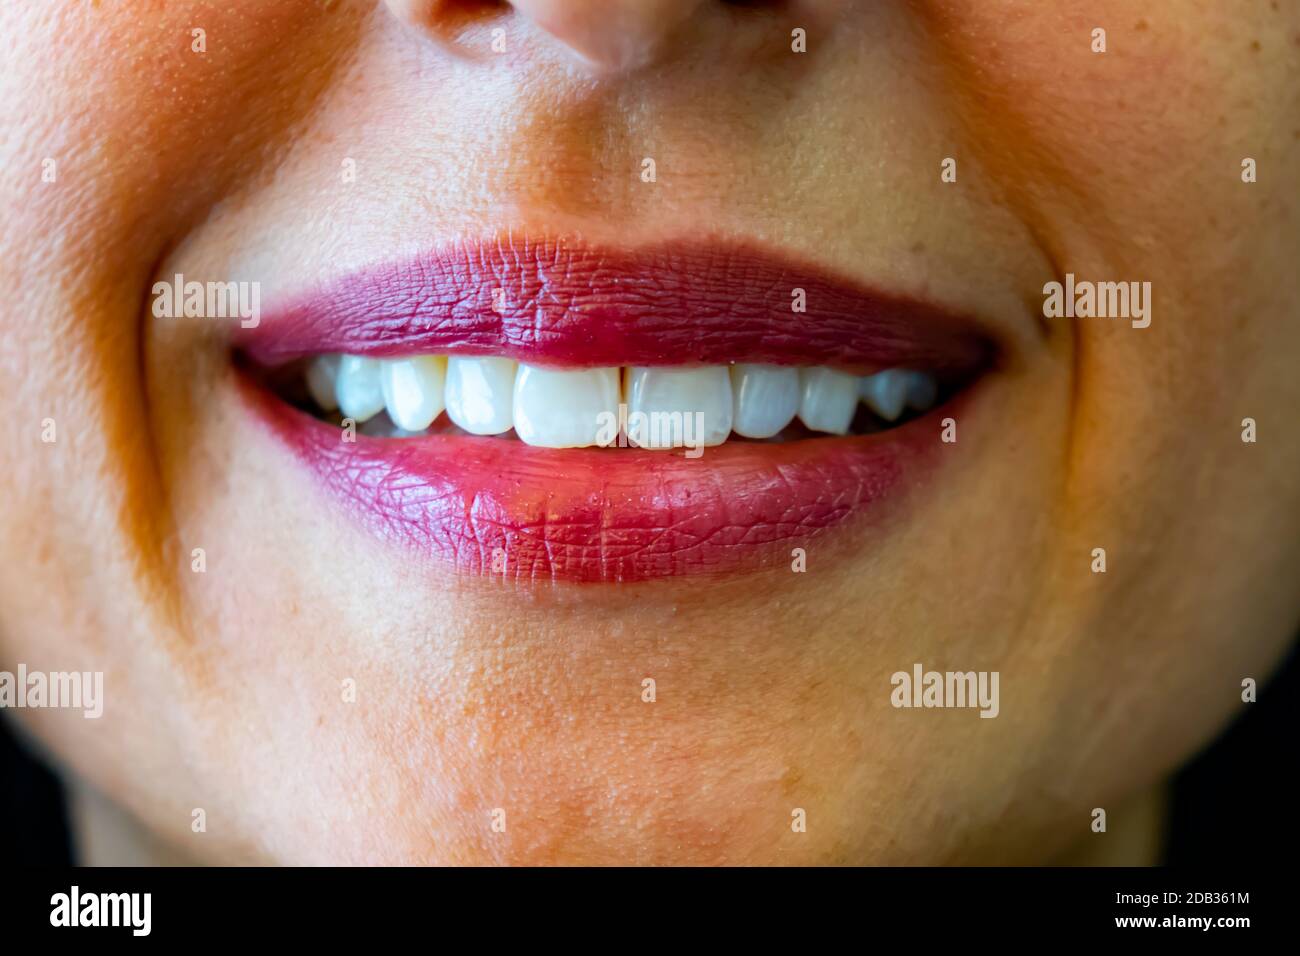 young woman's smile and a white teeth smile Stock Photo